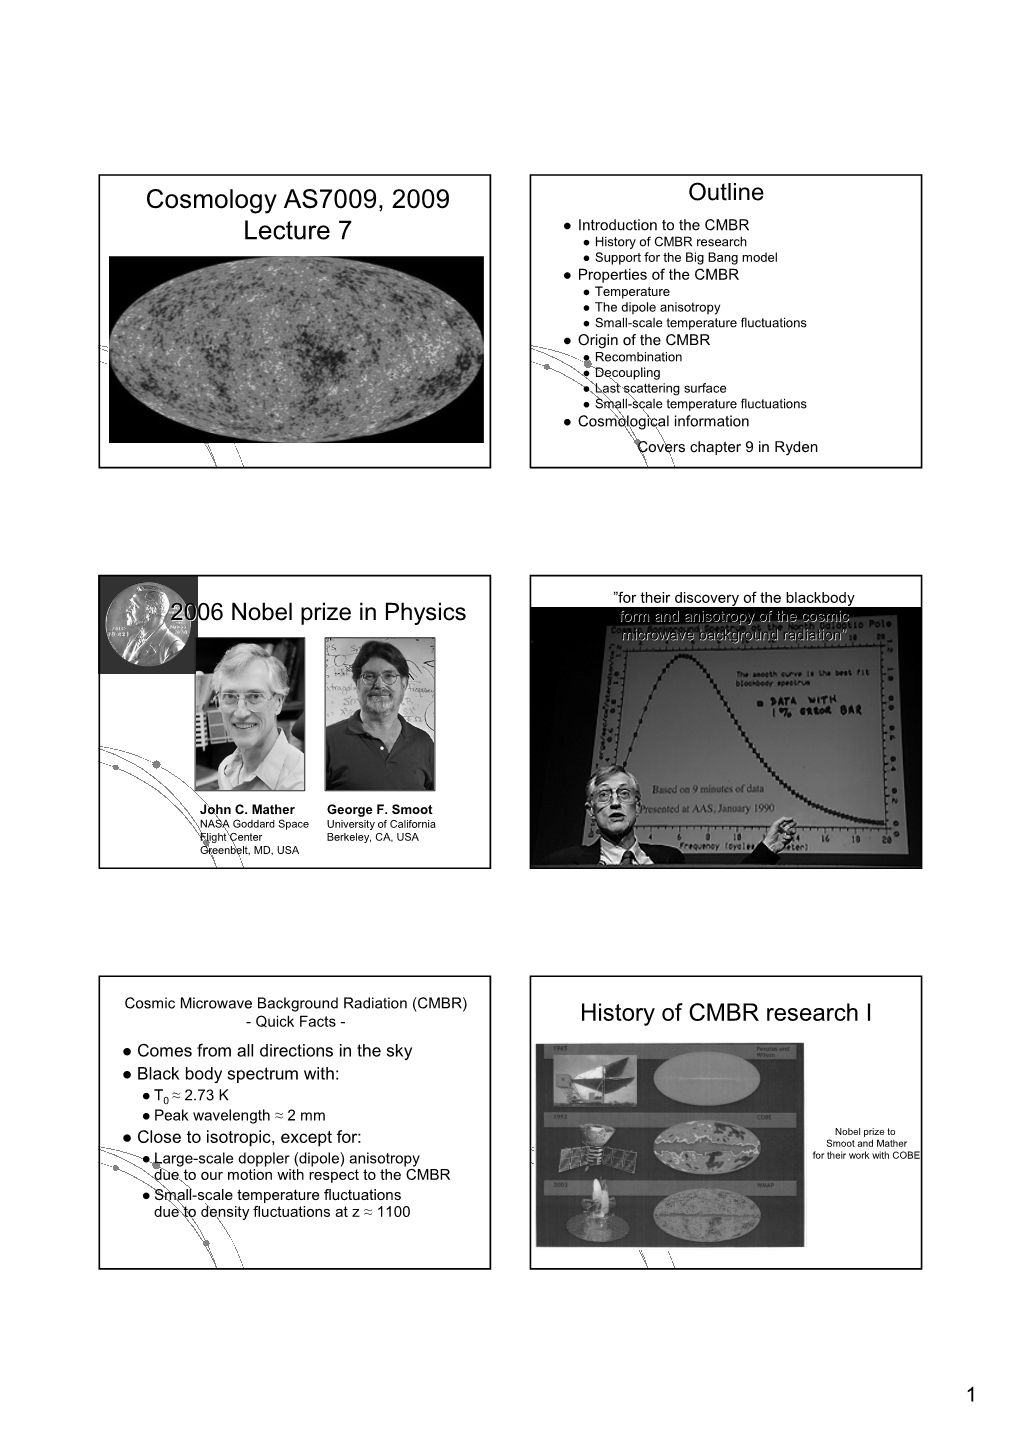 Cosmology AS7009, 2009 Lecture 7